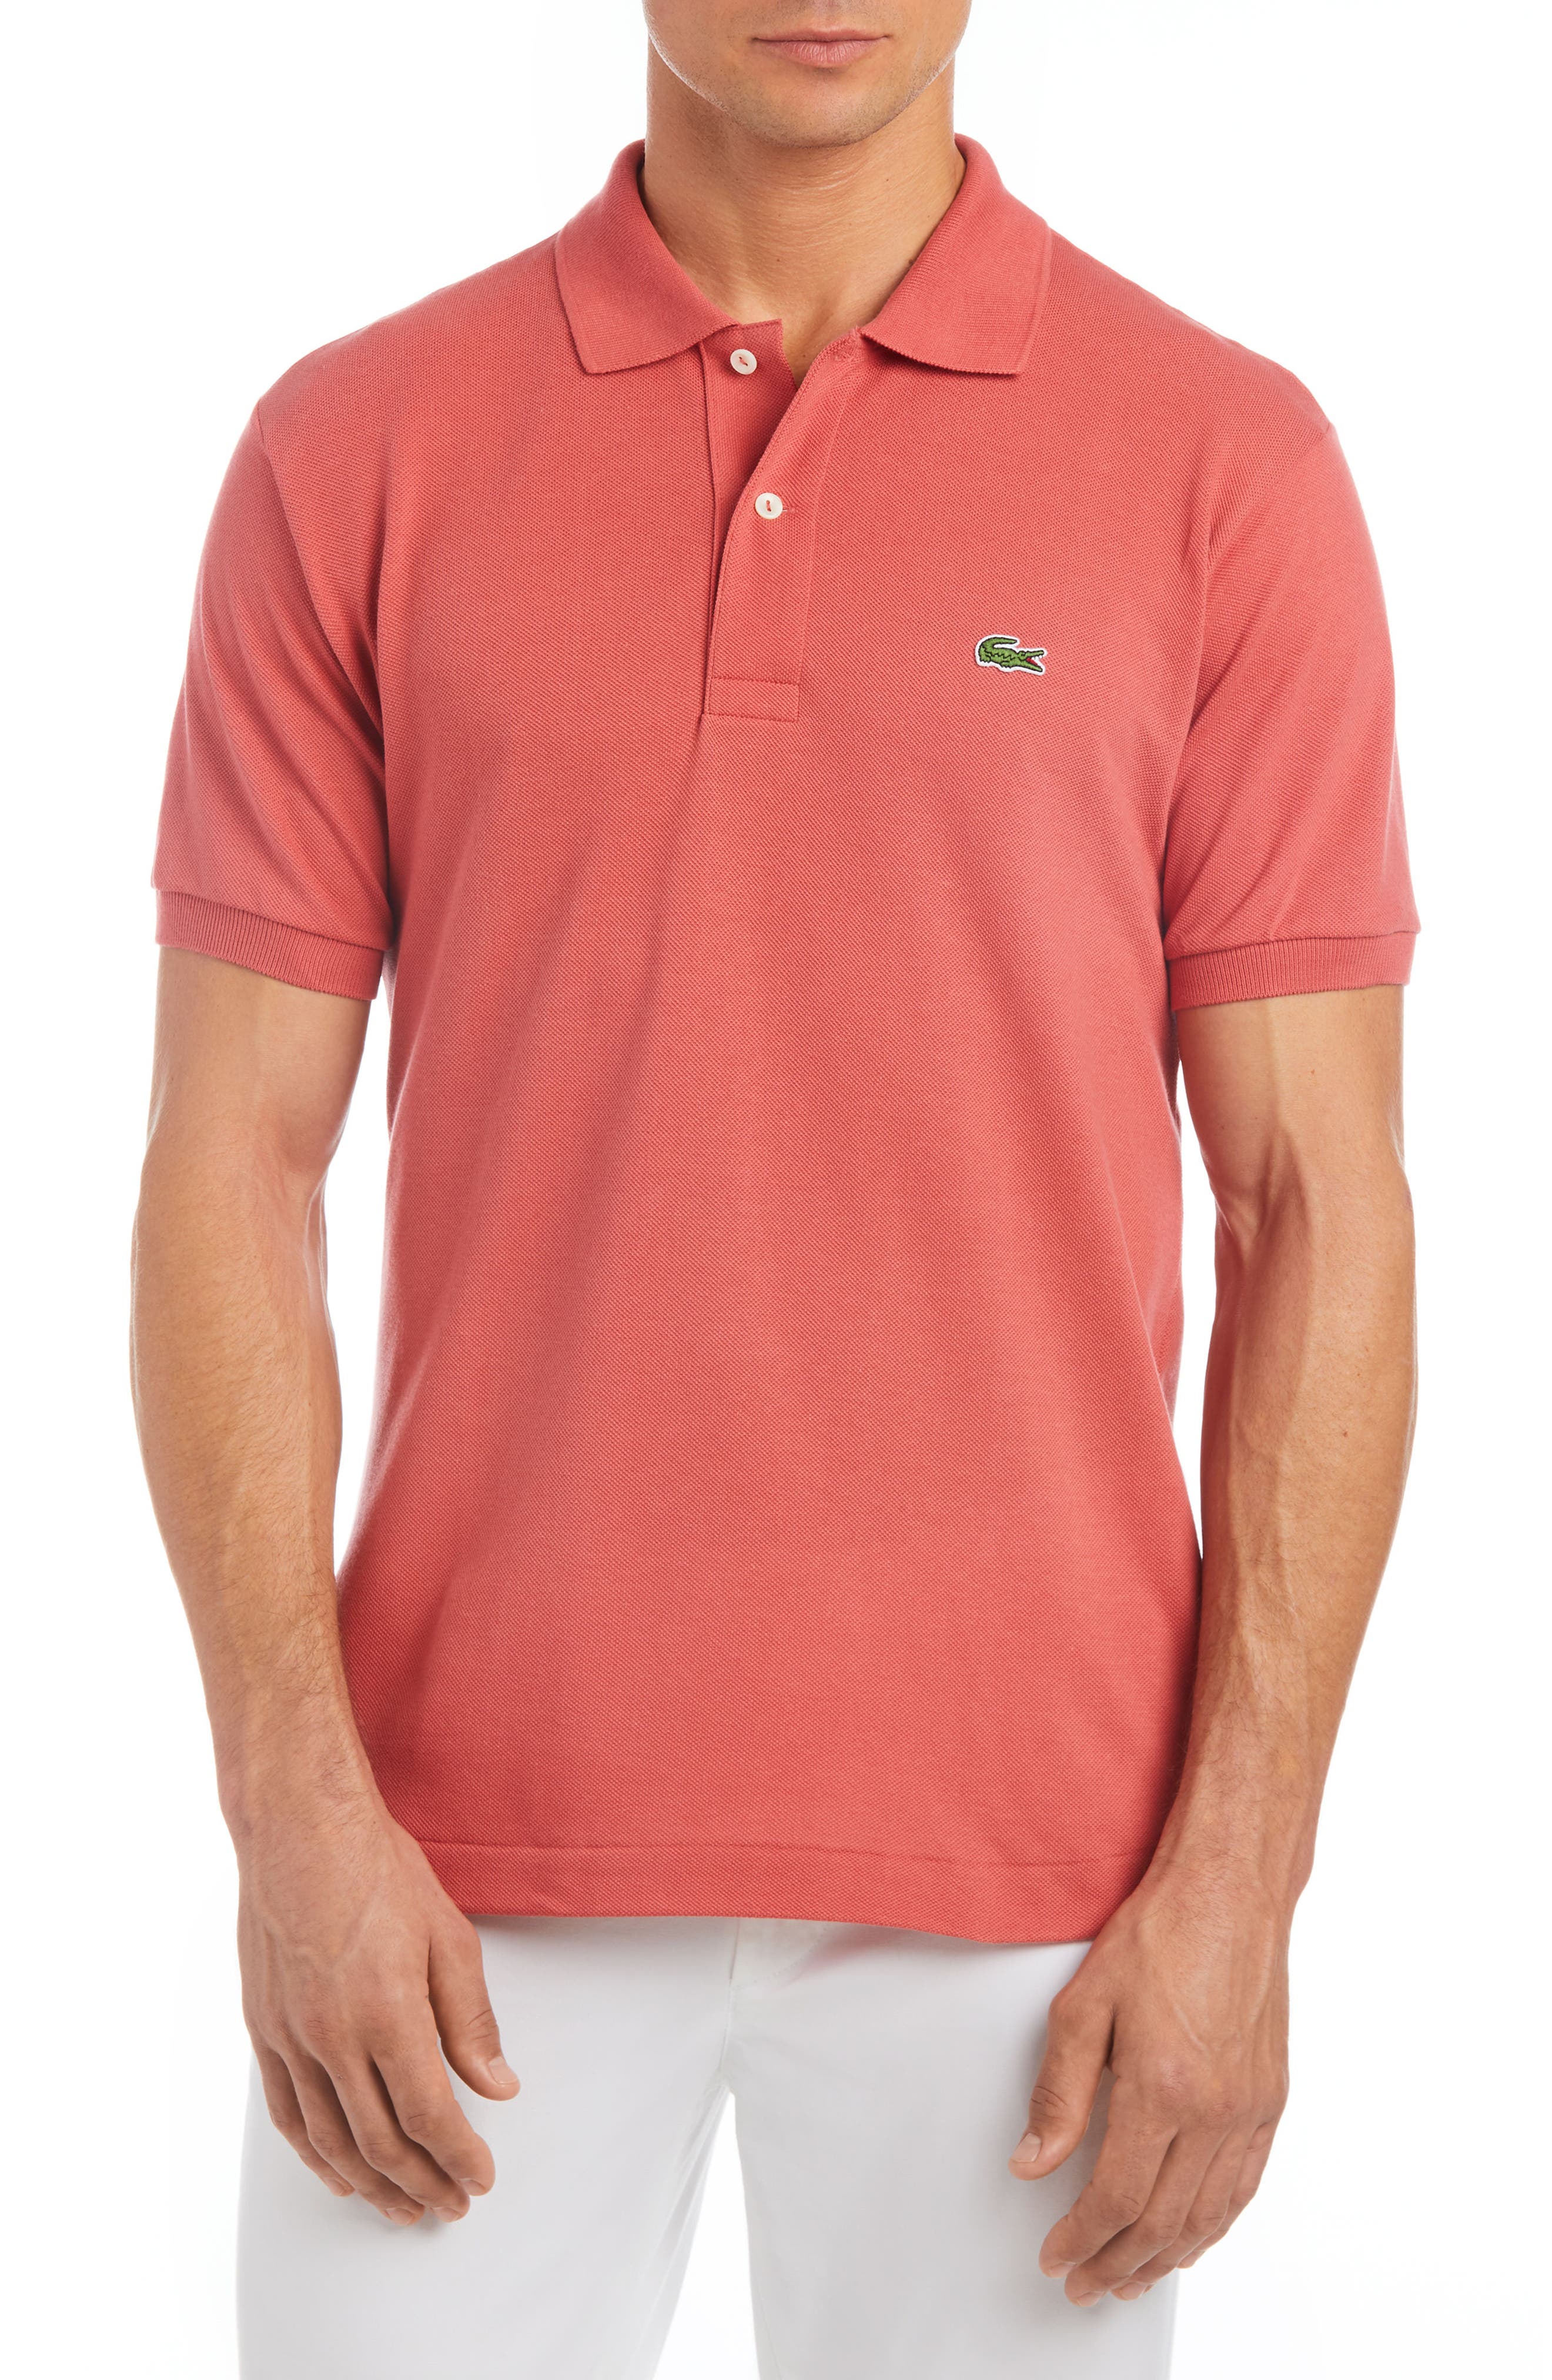 Lacoste Polo Shirt Price In Dubai - Prism Contractors & Engineers